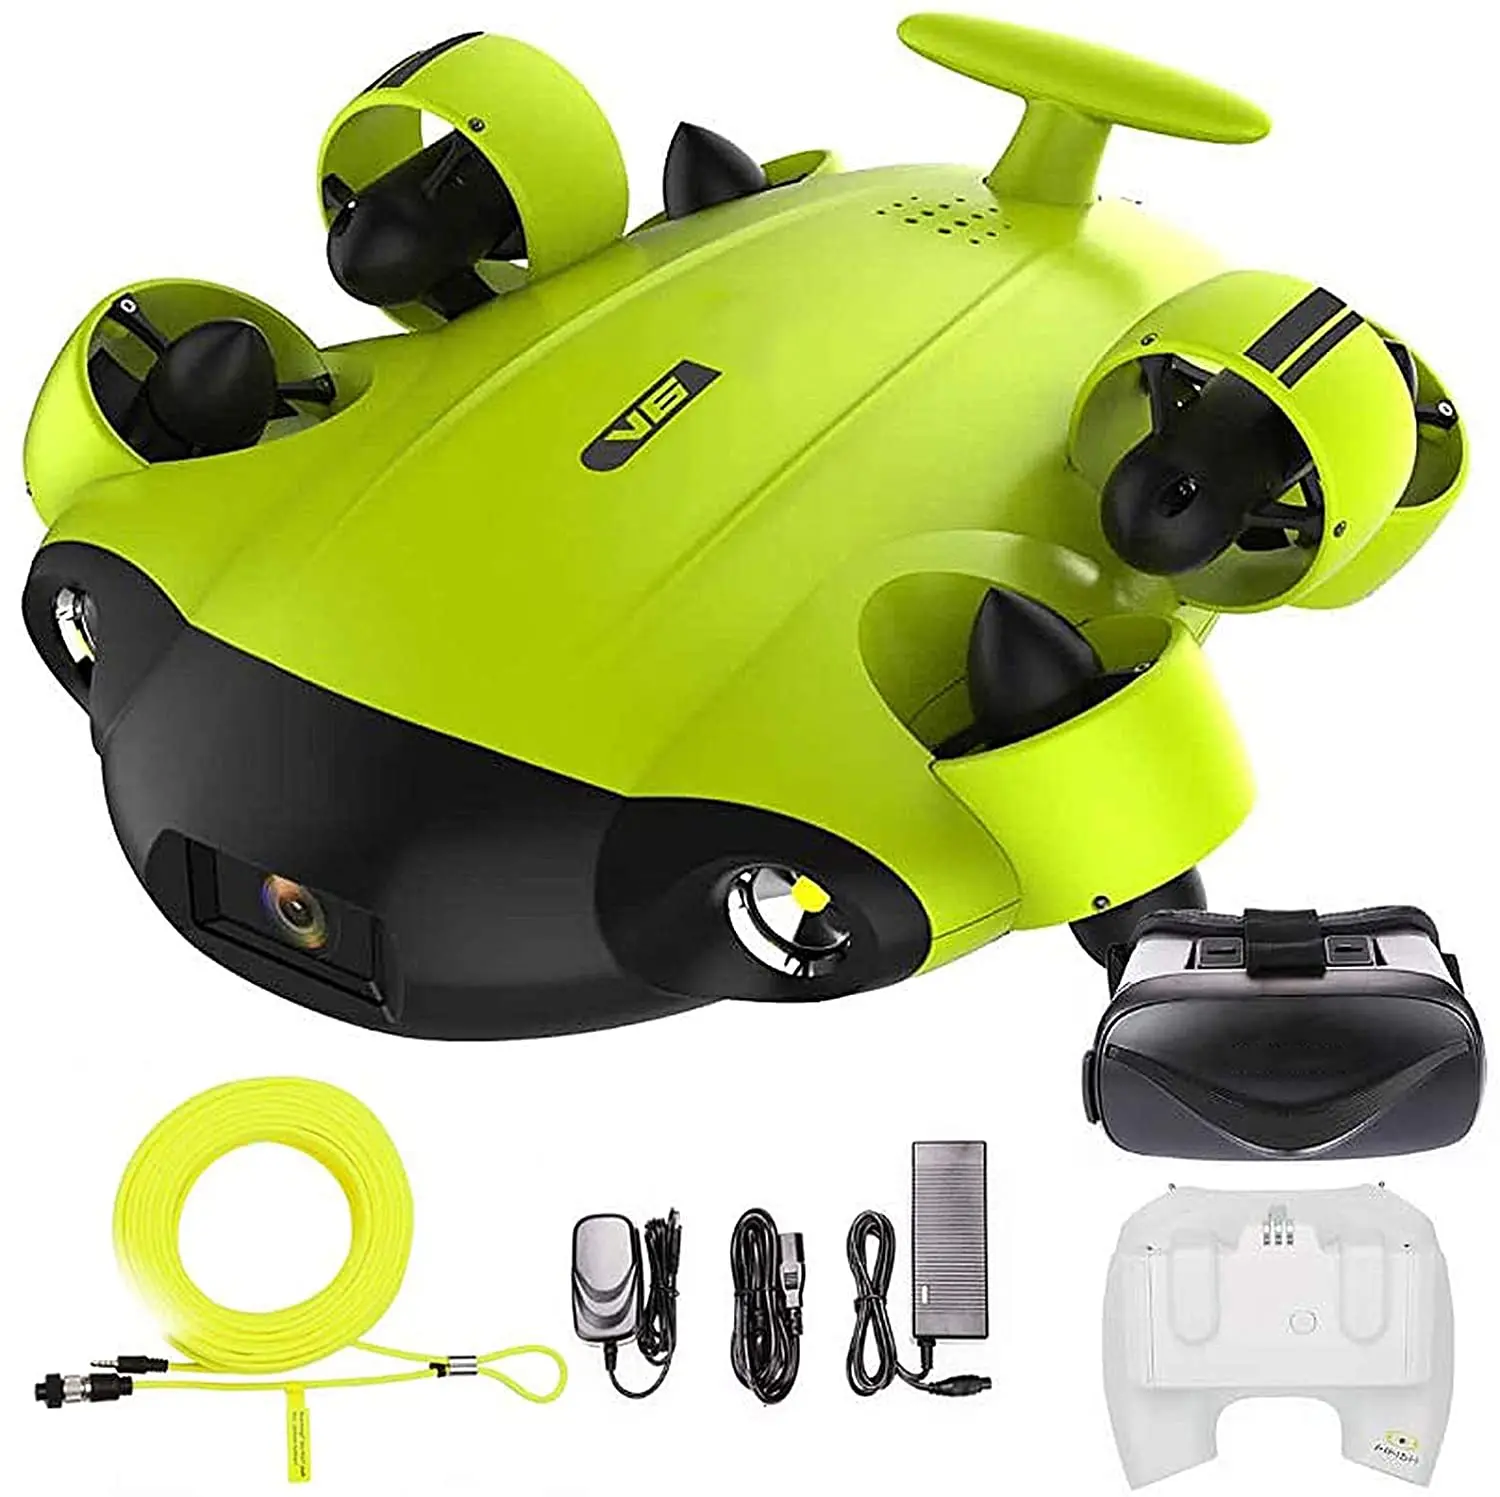 

New Fifish V6 Underwater Drone 100m Cable 4k Uhd Camera Vr Control Underwater Flight